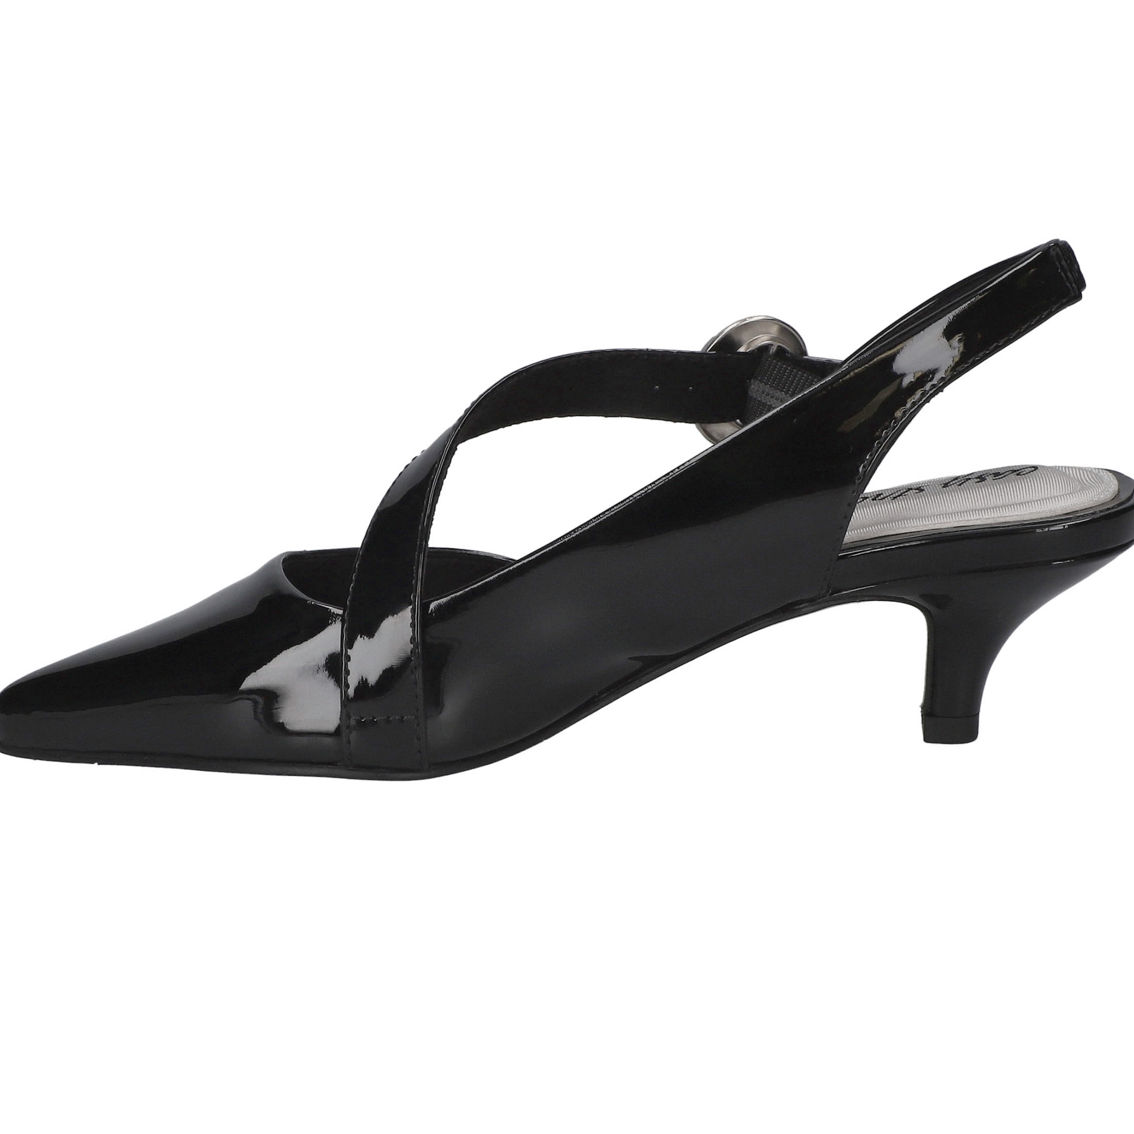 Sarita by Easy Street Asymmetrical Pumps - Image 5 of 5